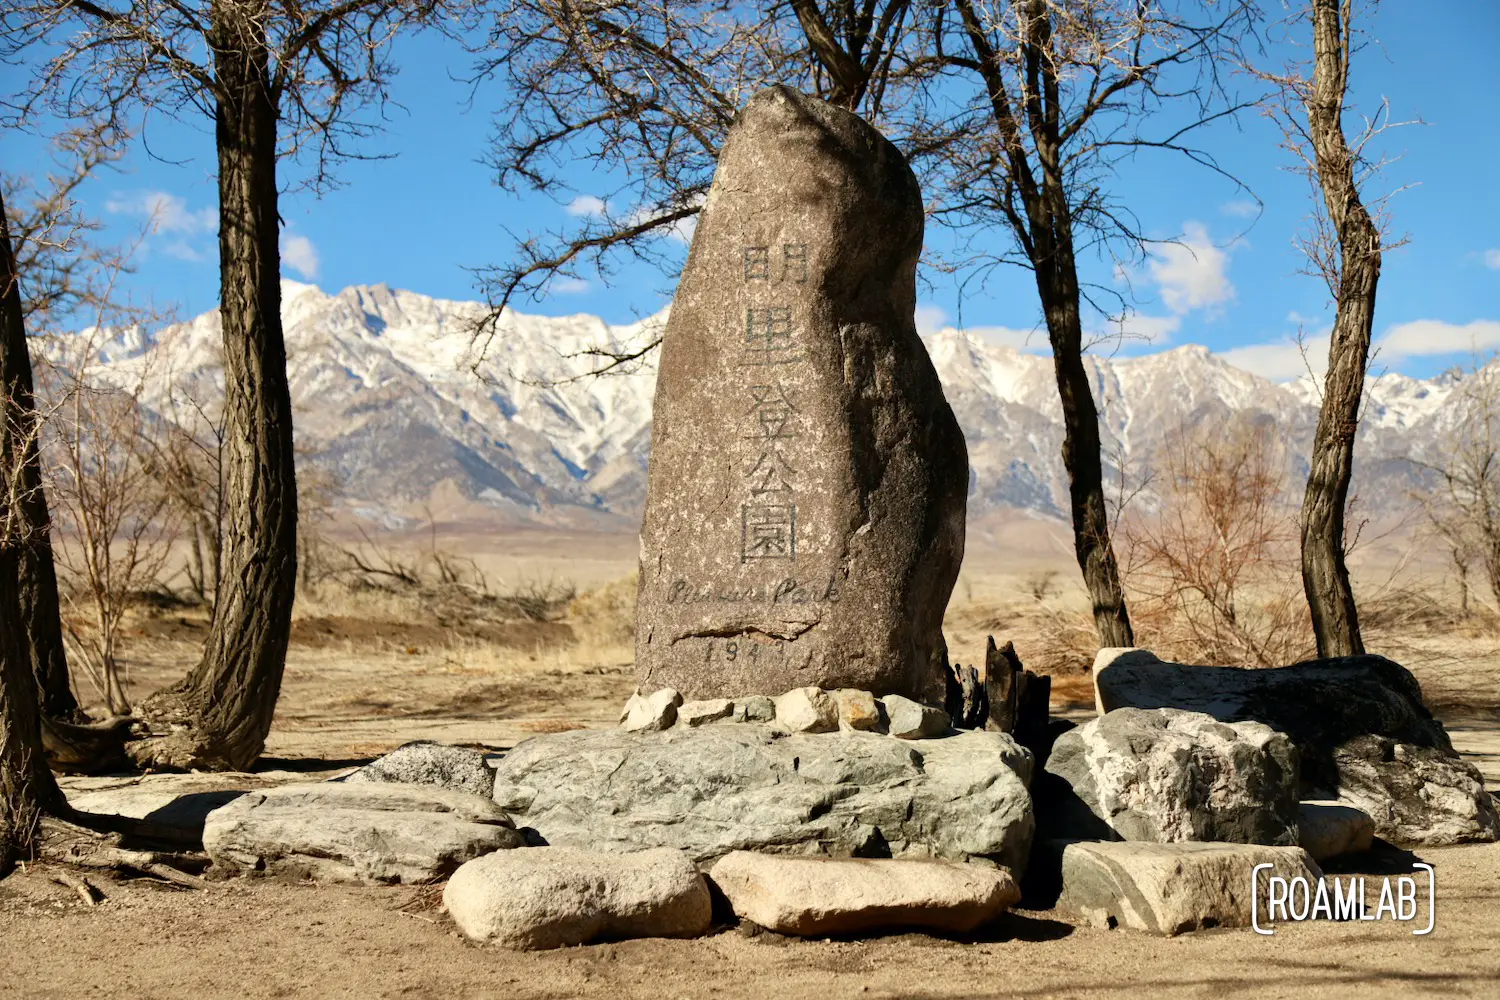 Pleasure Park Memorial, a stone pillar in Manzanar's largest park built by the residents.